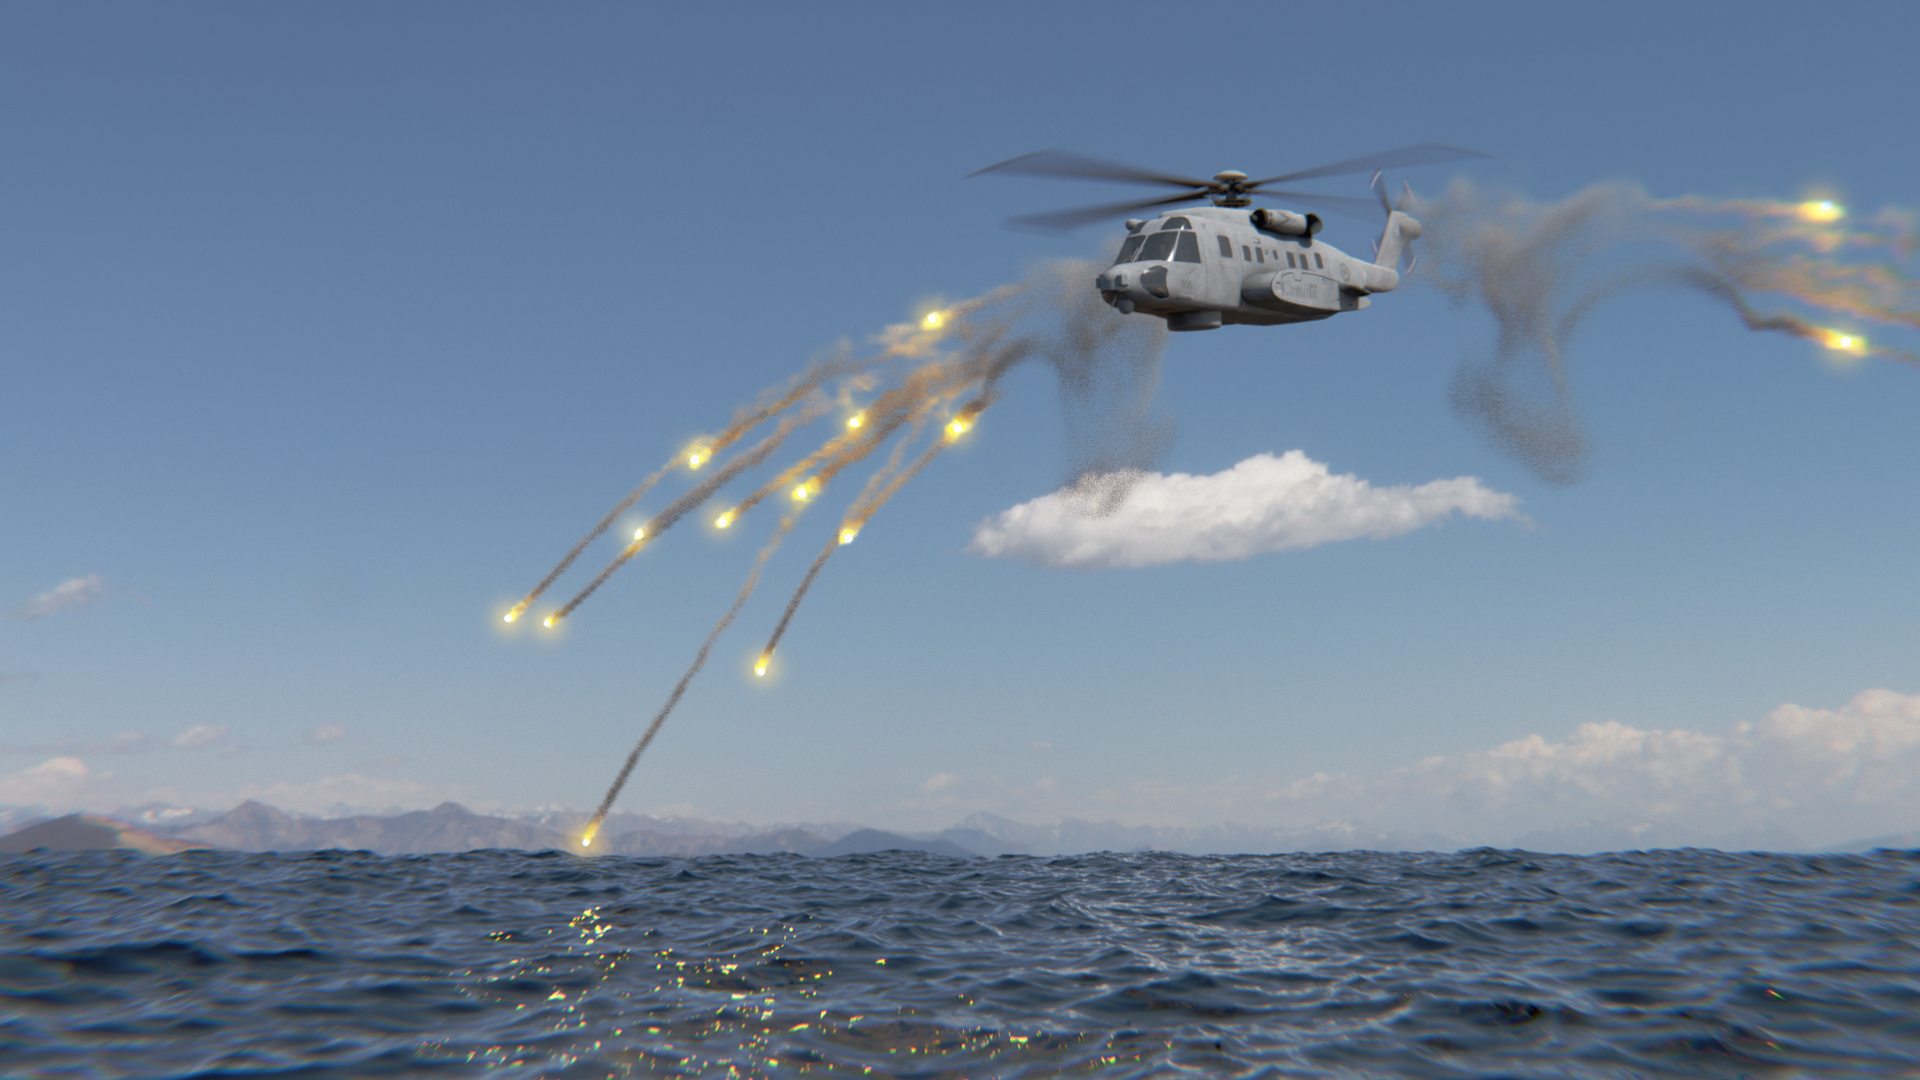 Helicopter shooting flares